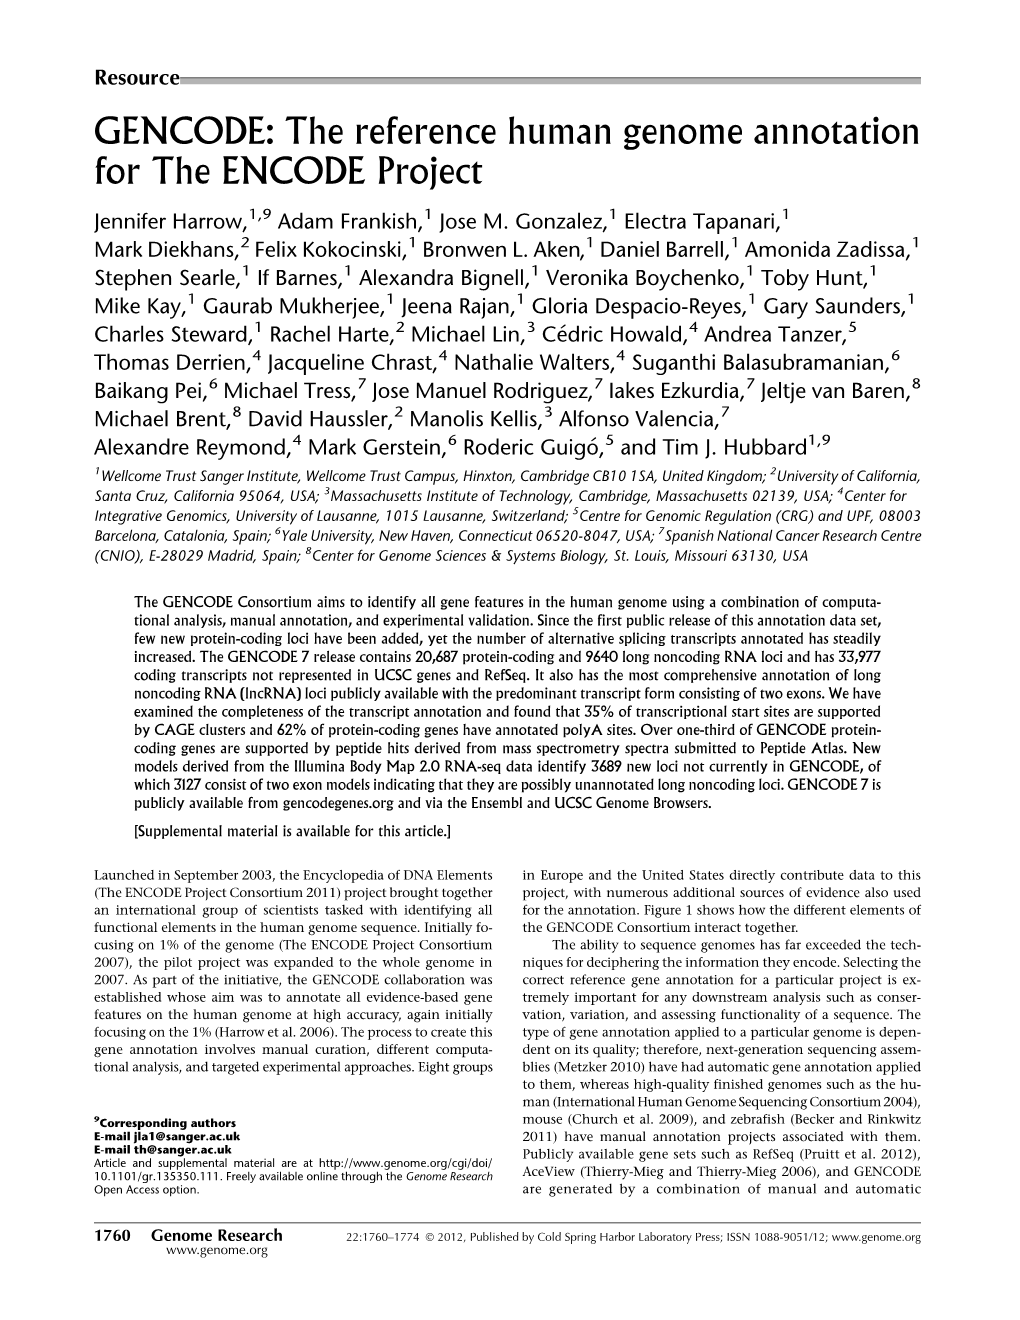 GENCODE: the Reference Human Genome Annotation for the ENCODE Project